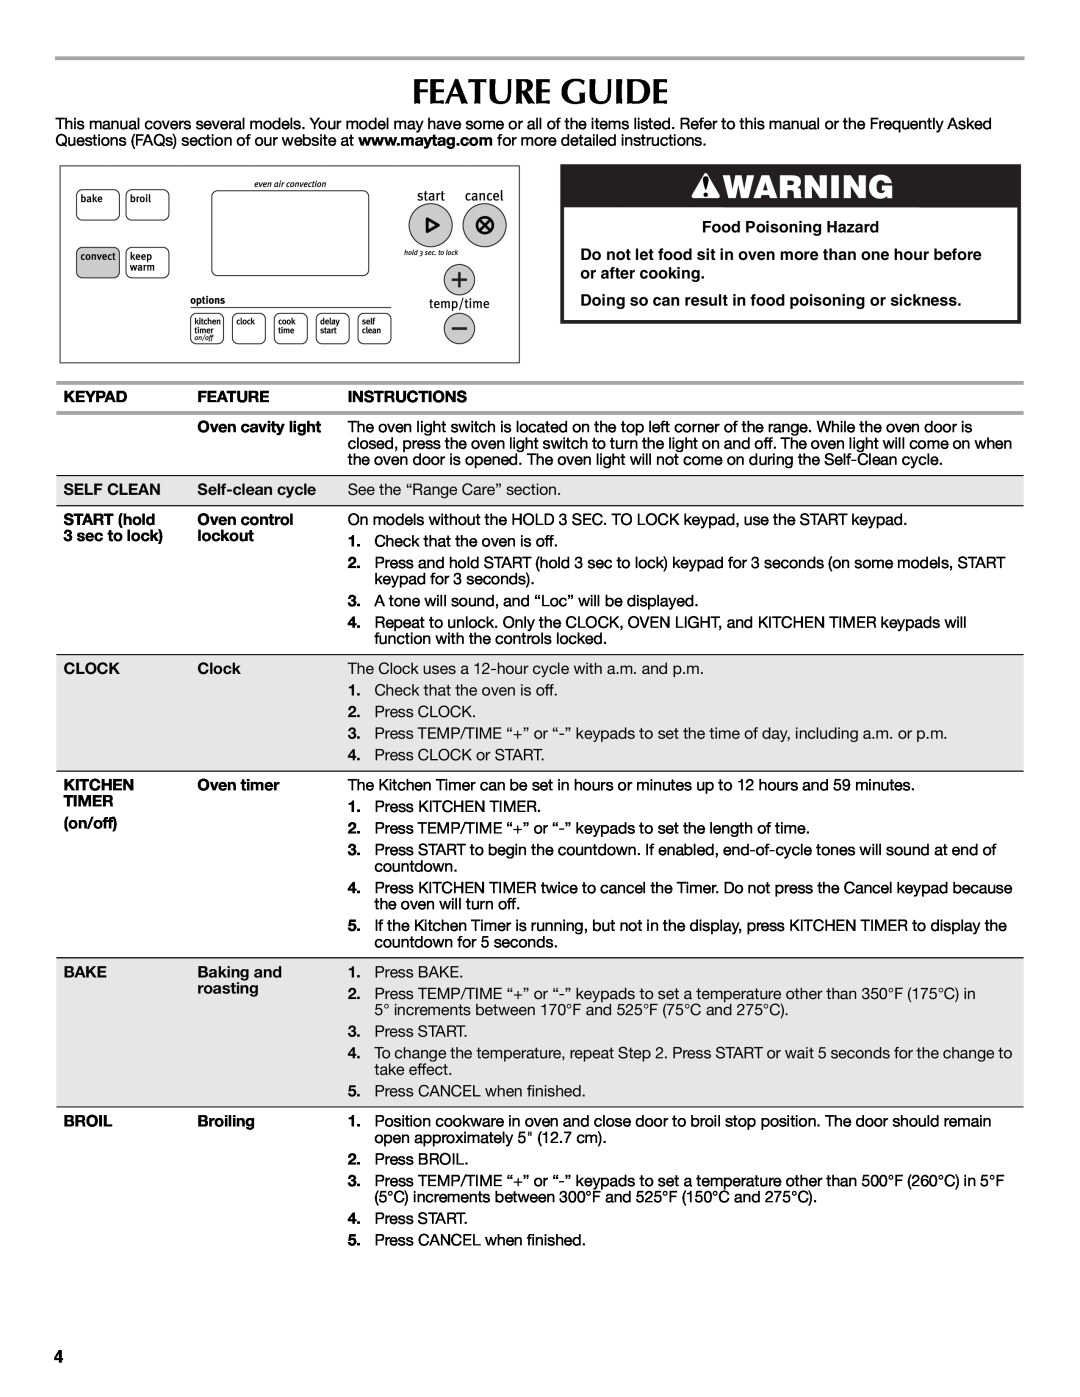 Maytag W10249693A, W10239458A Feature Guide, Food Poisoning Hazard, Doing so can result in food poisoning or sickness 